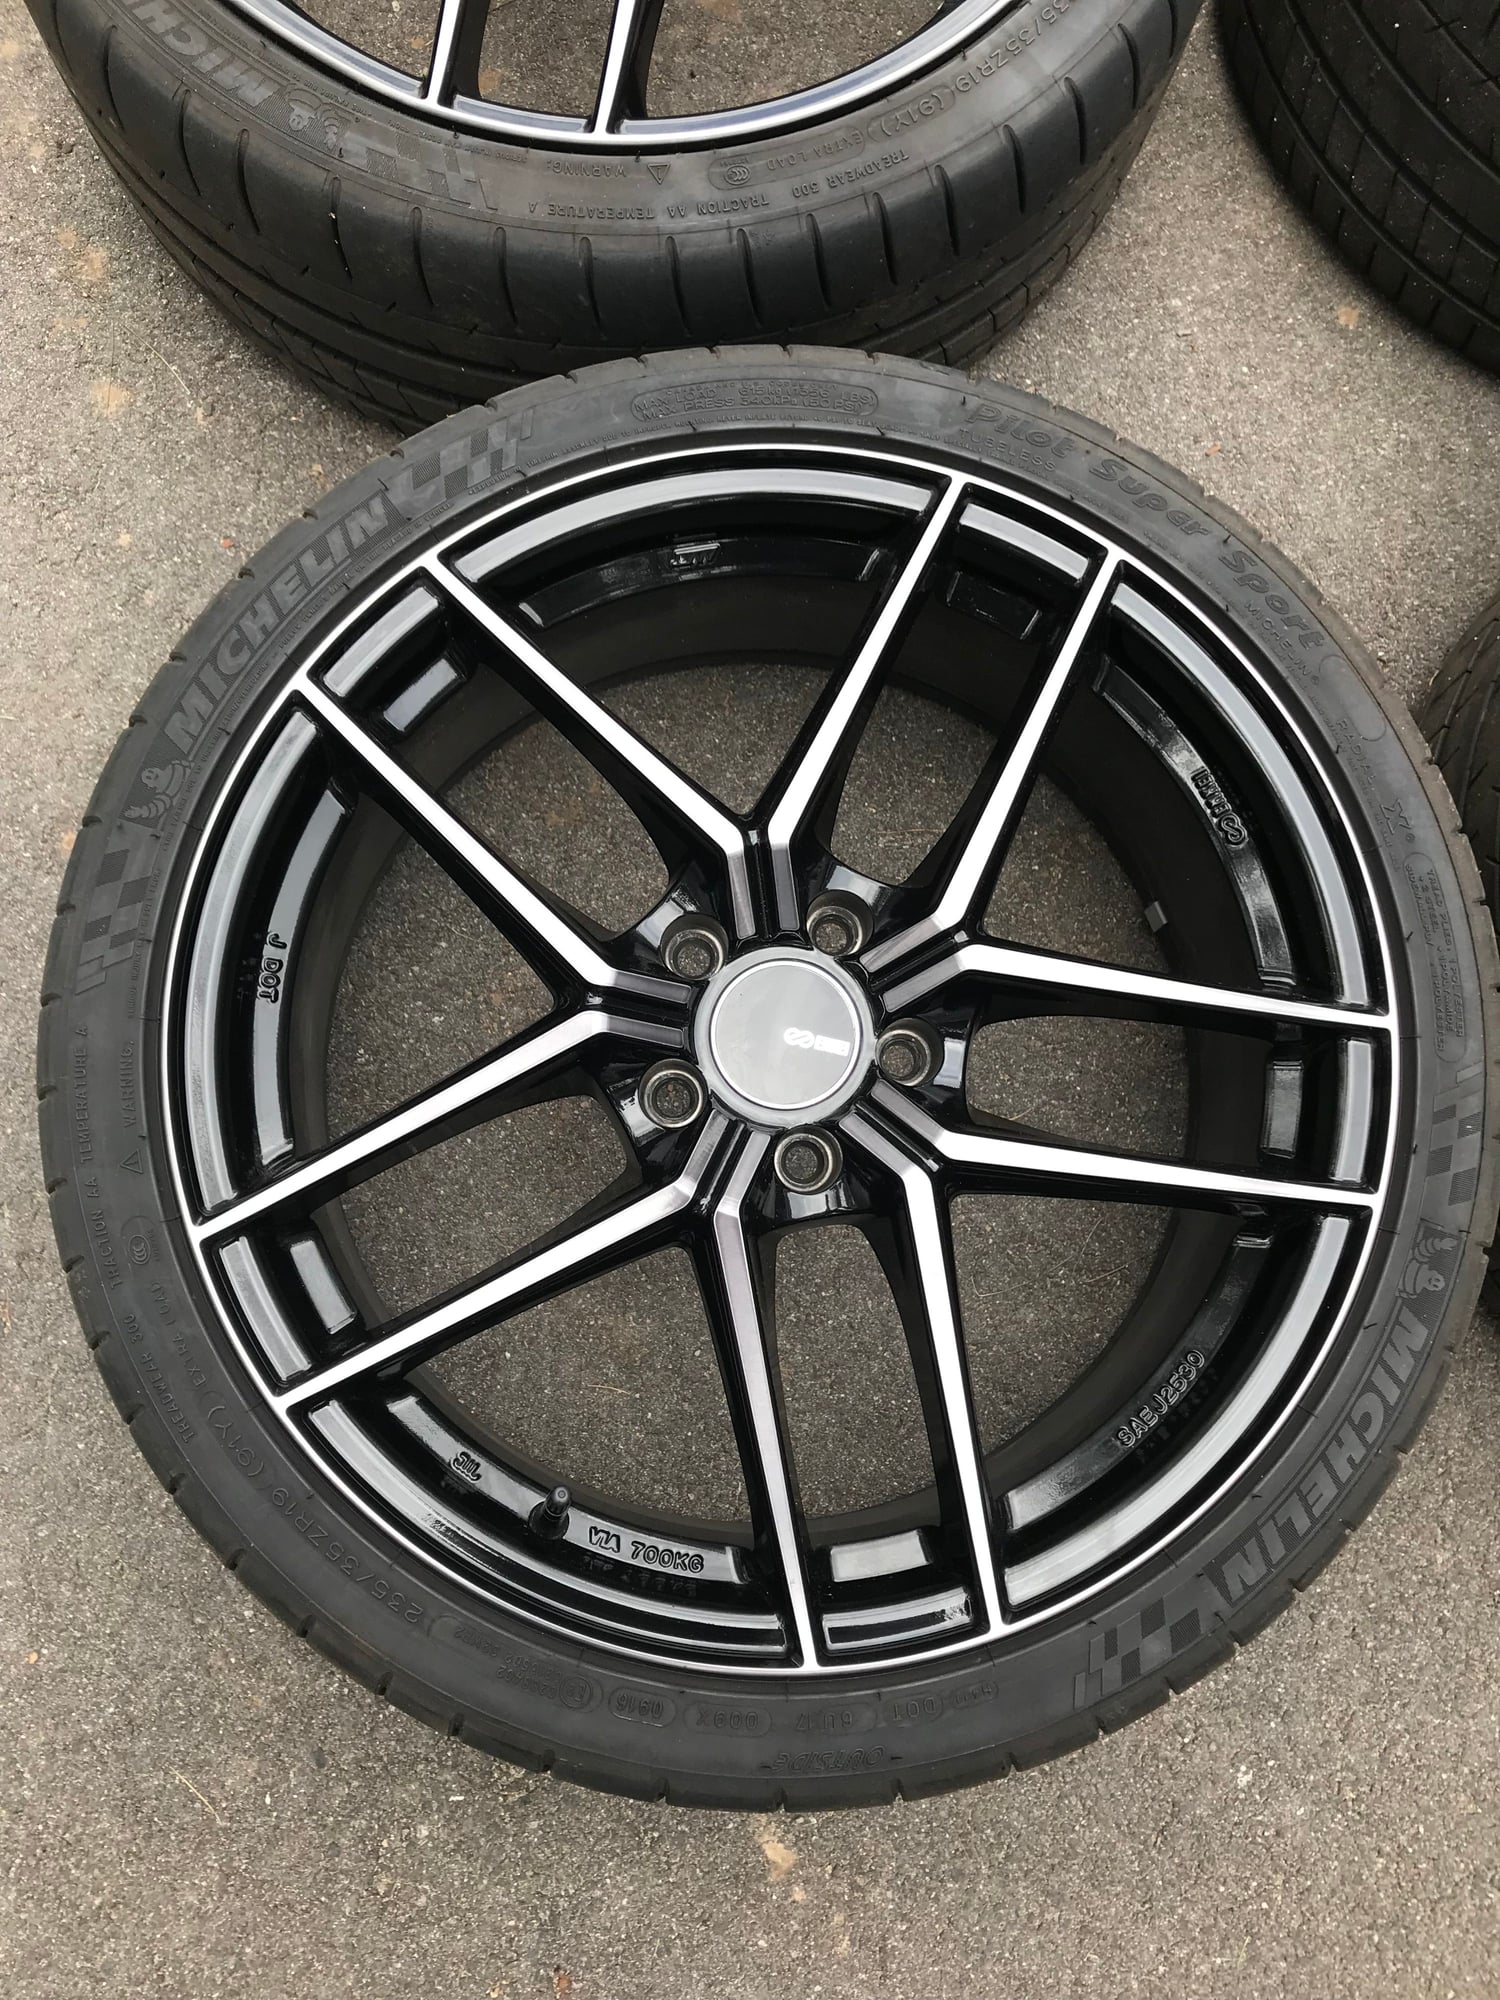 Wheels and Tires/Axles - 19" Enkei TY-5 wheels with Michelin Pilot Super Sport tires - Used - Medfield, MA 02052, United States